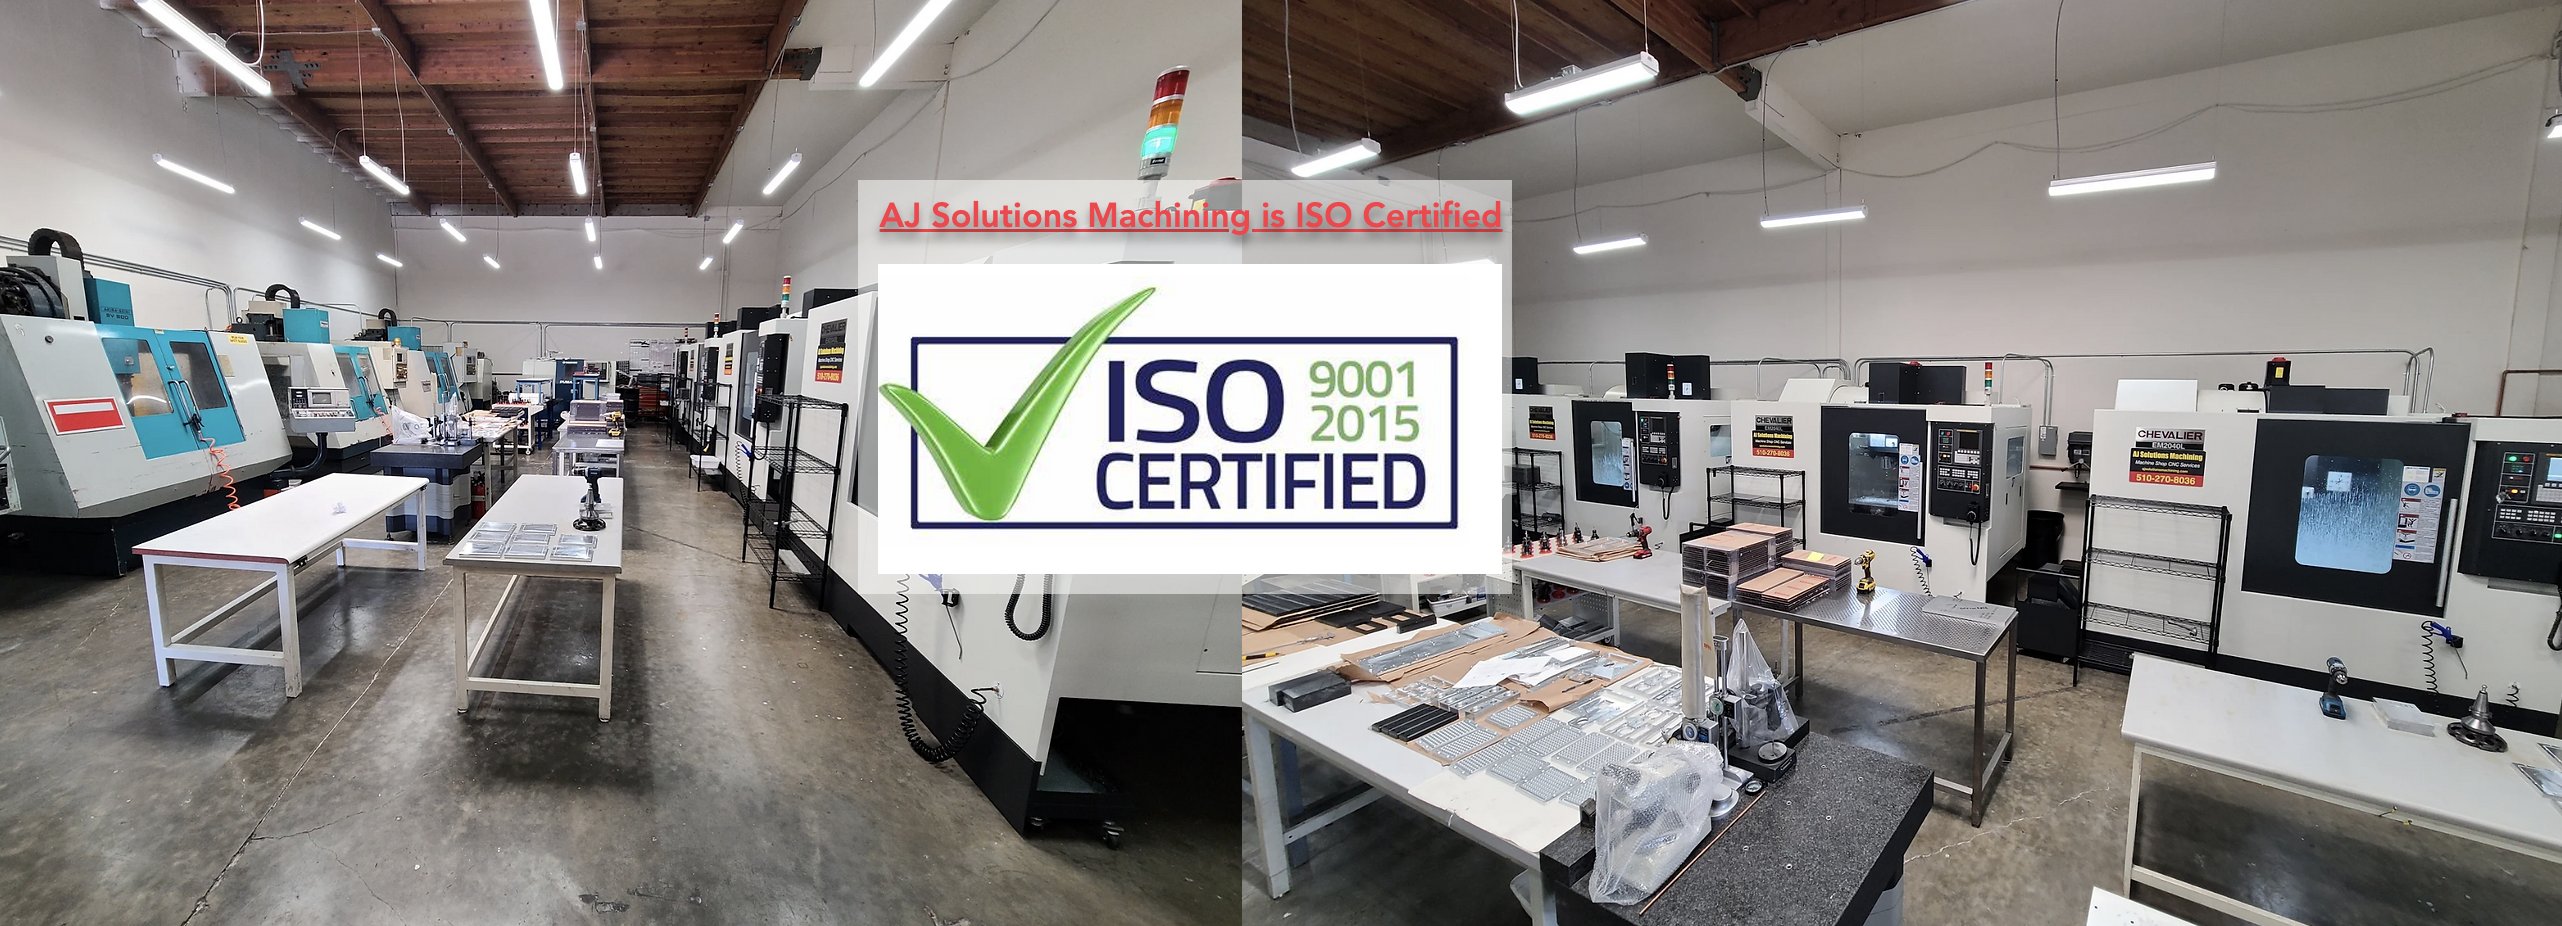 ISO 9001 certified precision CNC machining services in San Leandro CA, Industries incredible accuracies, Fremont CA Machine shop, EV cars parts